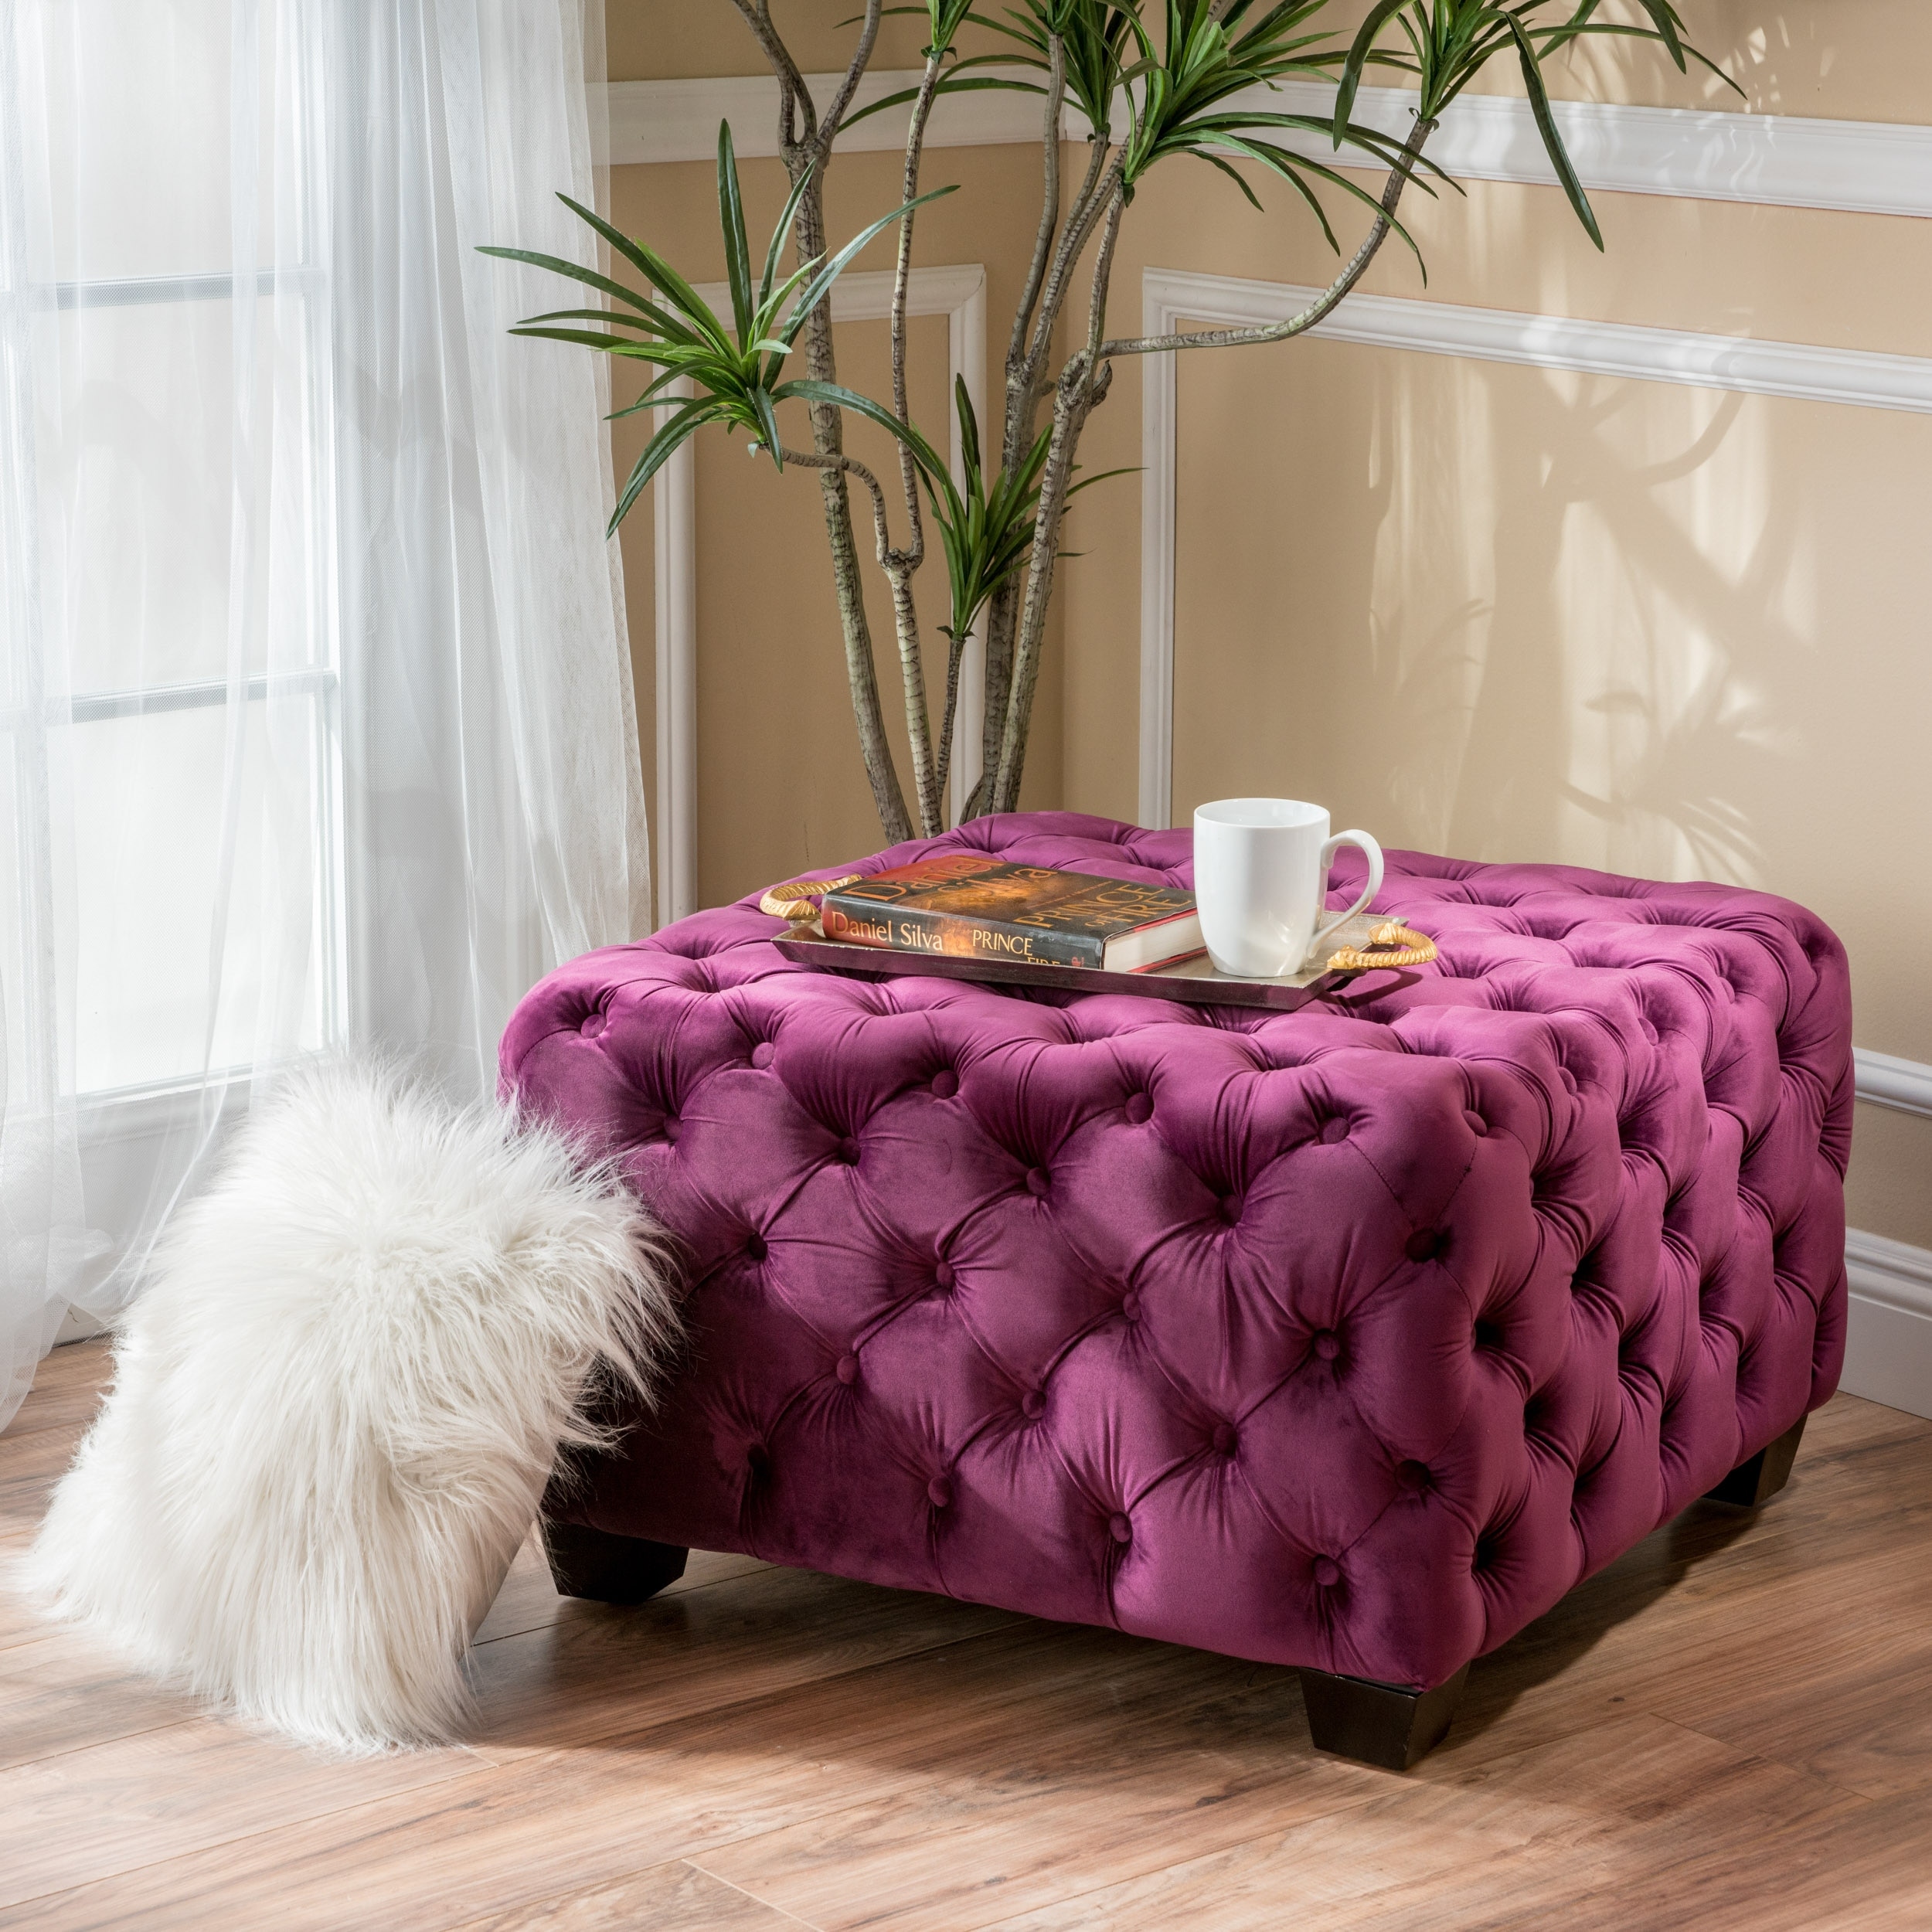 WINSTON TUFTED OTTOMAN - REVIVAL HOME